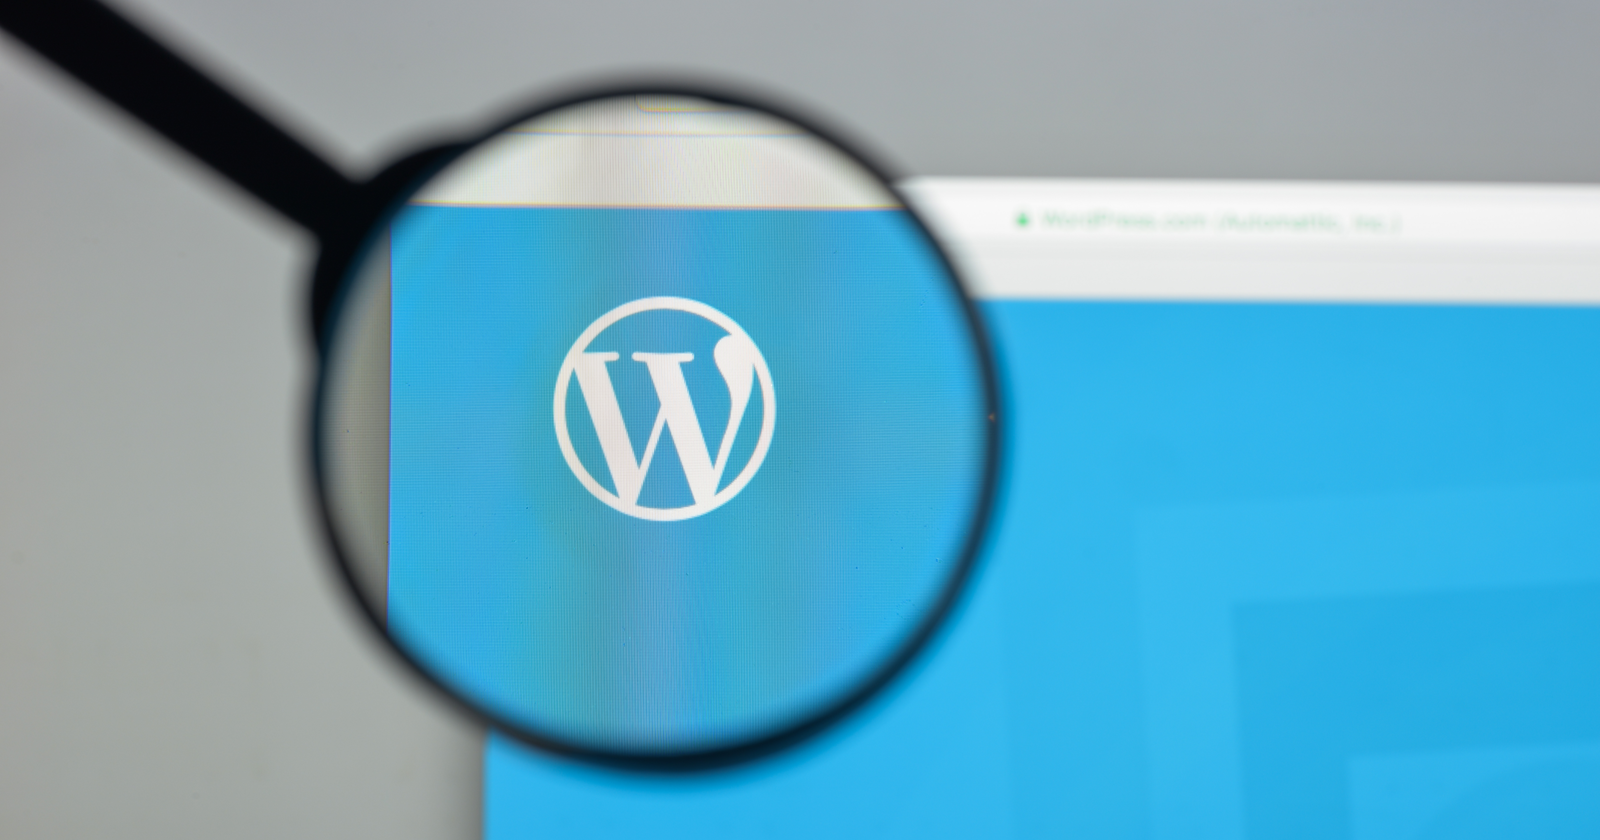 25 WordPress SEO Mistakes to Fix for Better Rankings